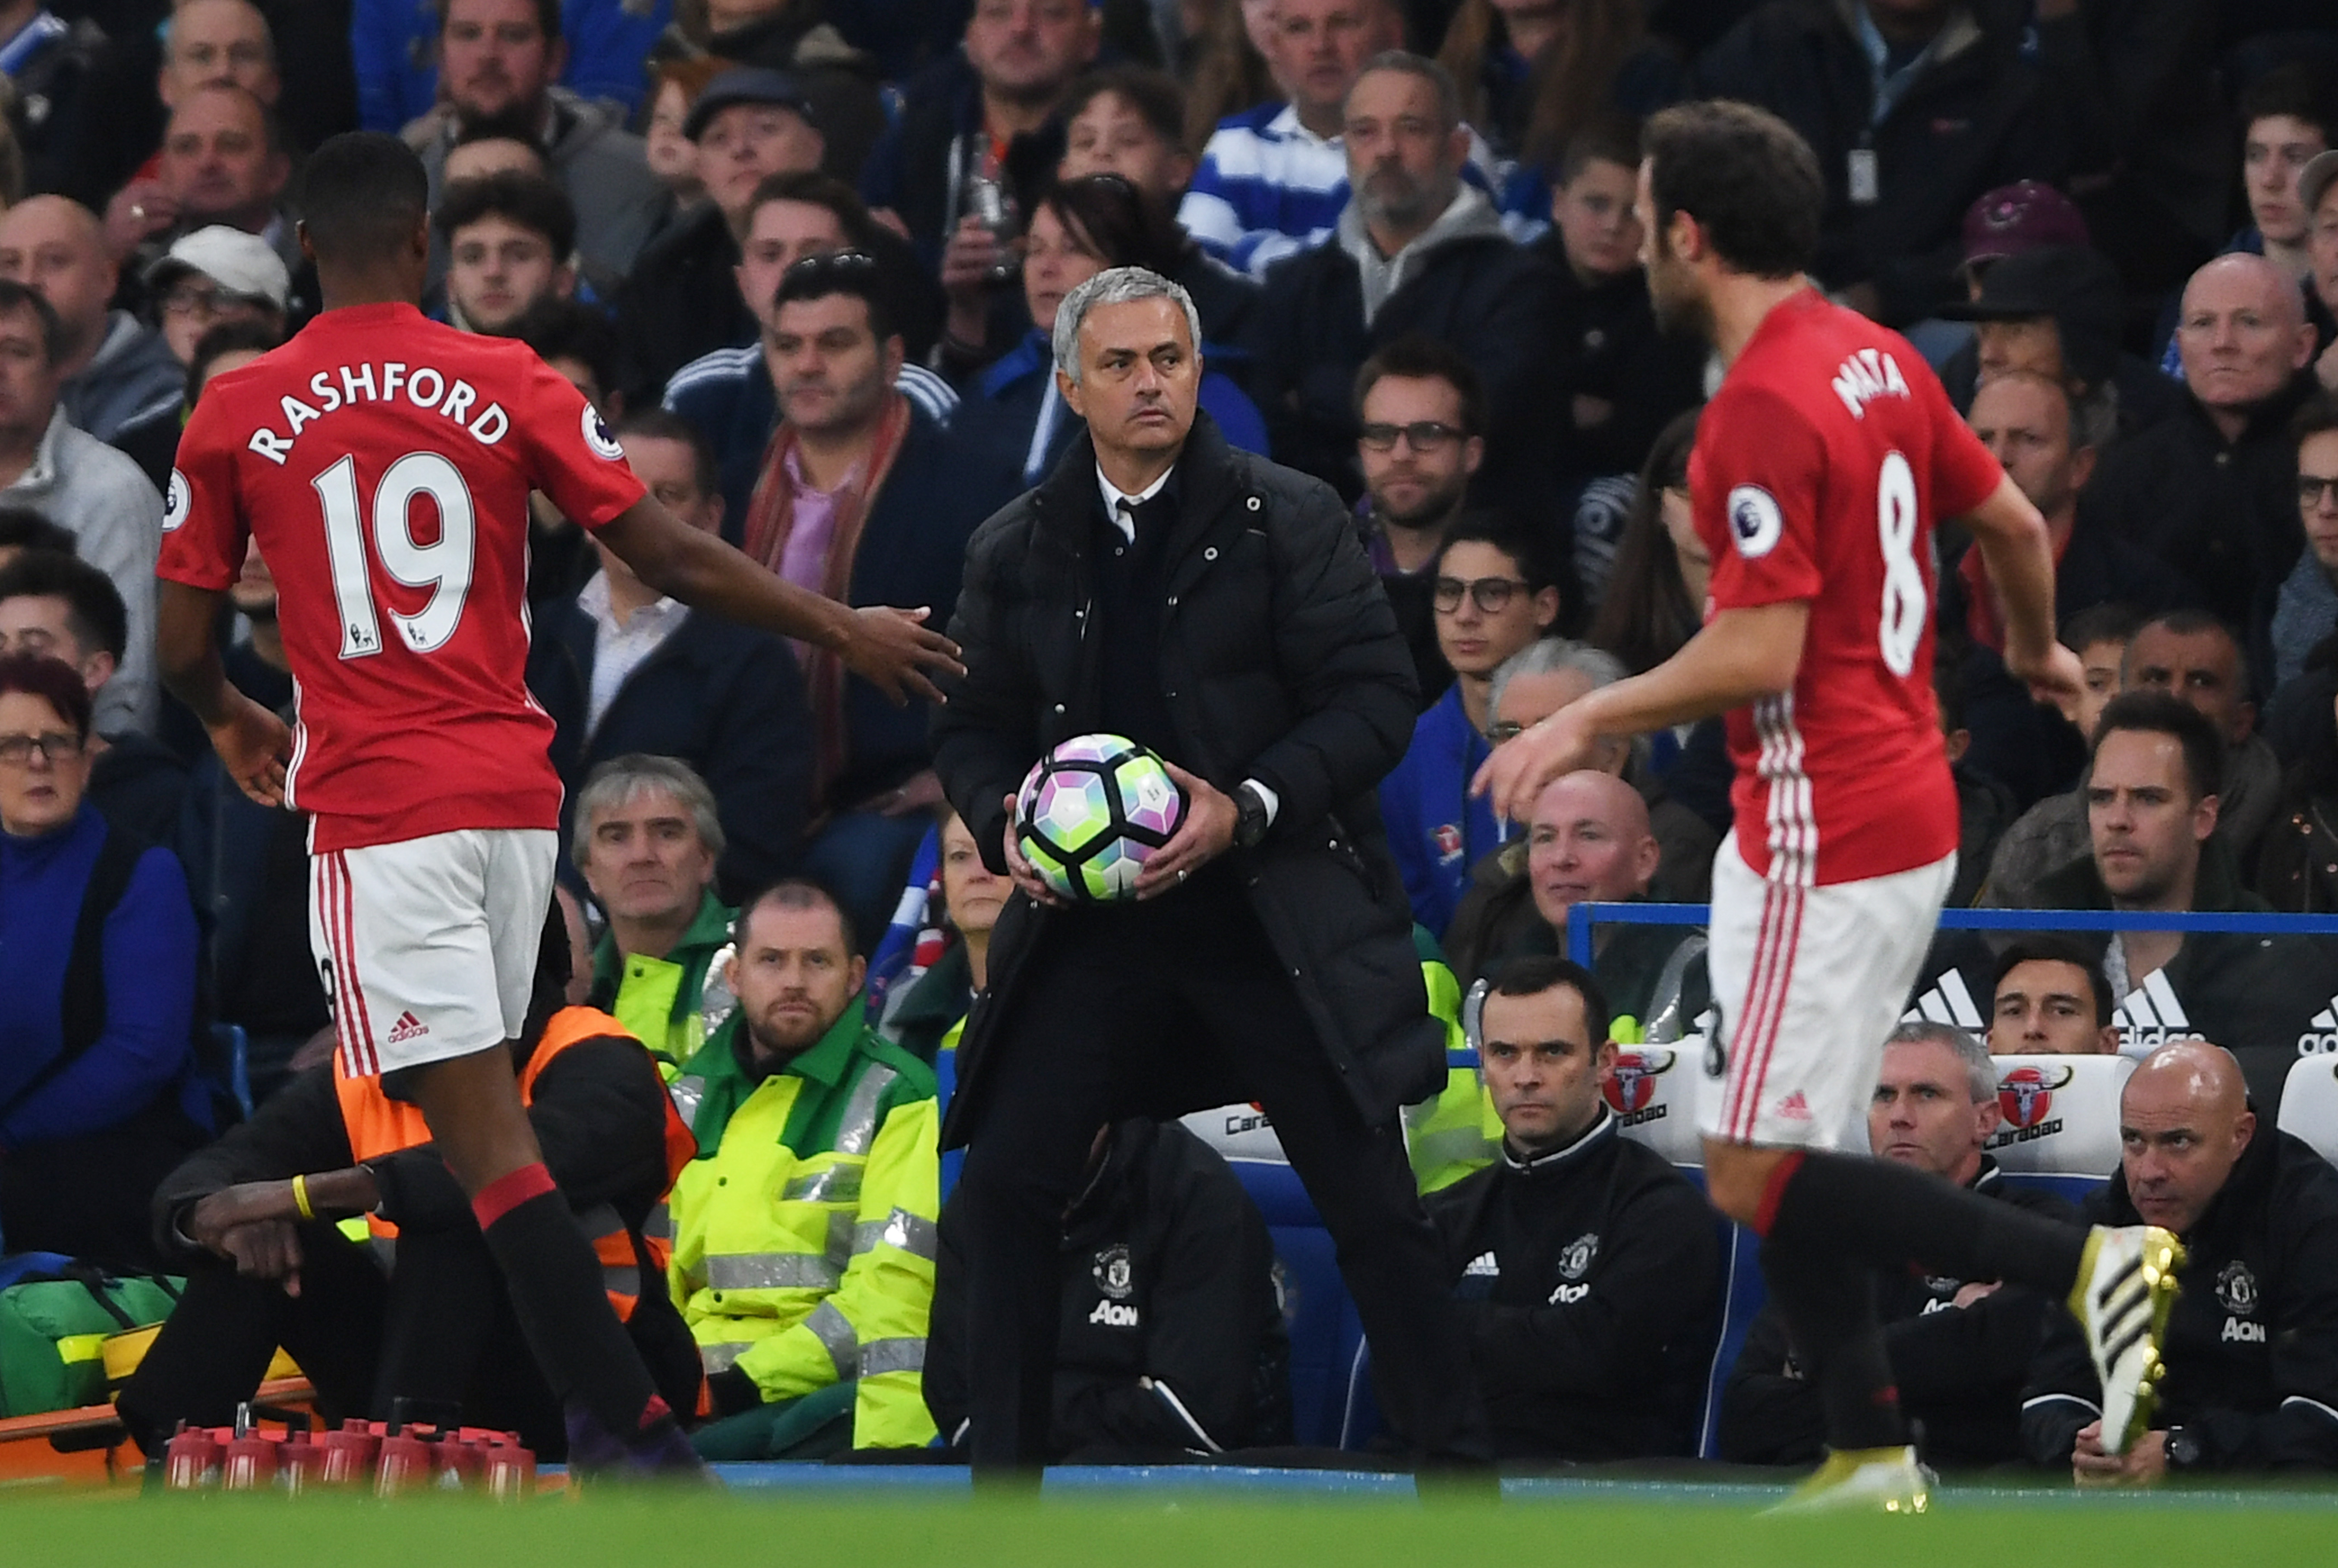 LONDON, ENGLAND - OCTOBER 23:  Jose Mourinho, Manager of Manchester United reacts during the Premier League match between Chelsea and Manchester United at Stamford Bridge on October 23, 2016 in London, England.  (Photo by Mike Hewitt/Getty Images)